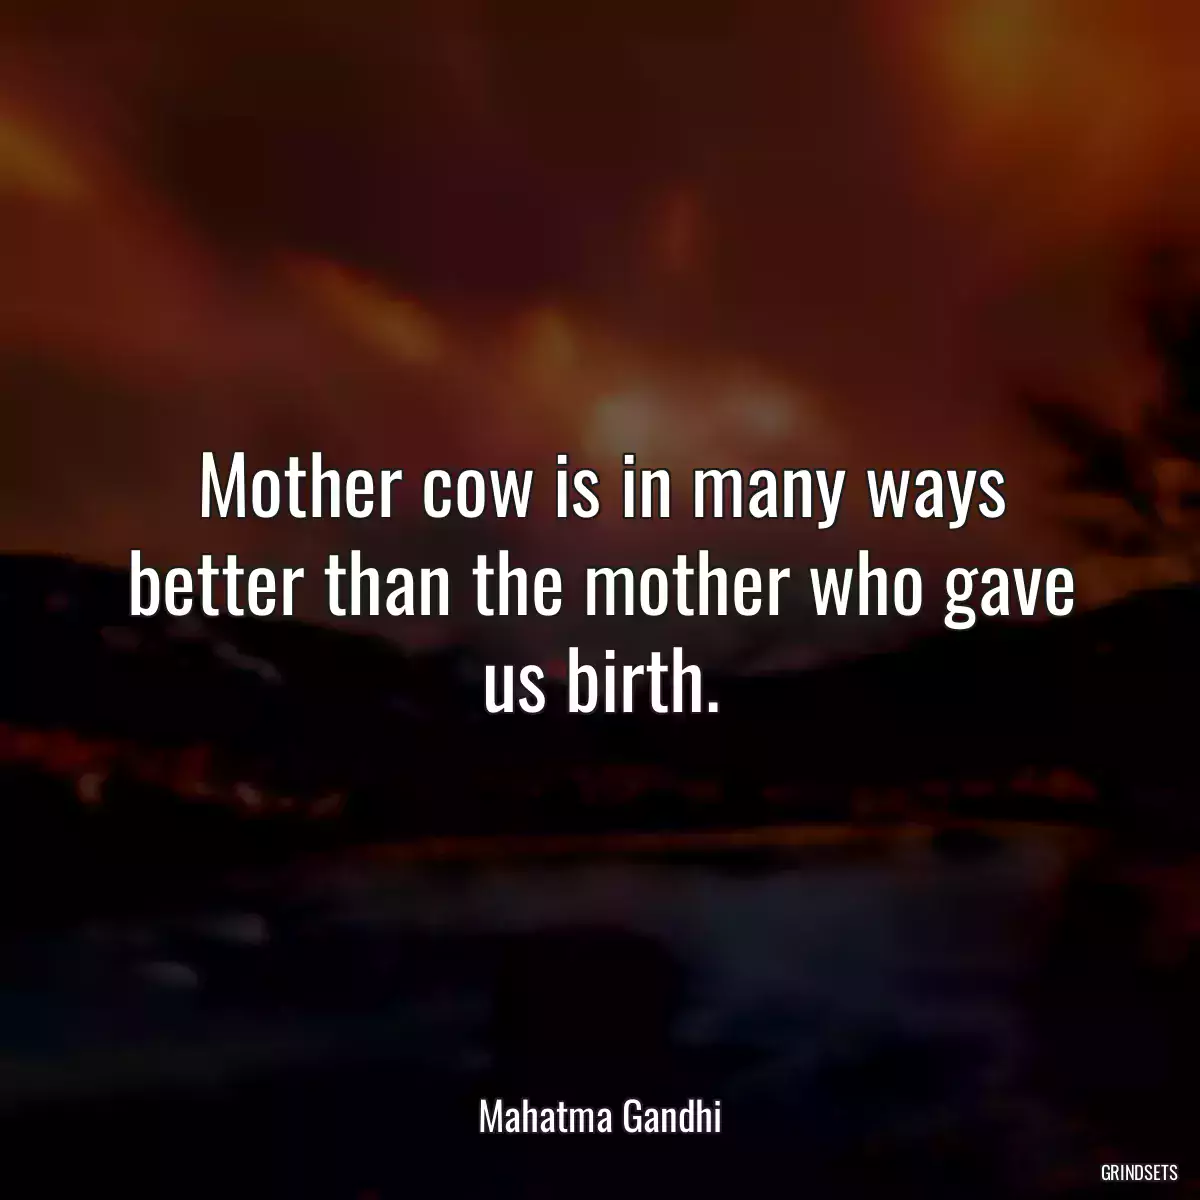 Mother cow is in many ways better than the mother who gave us birth.